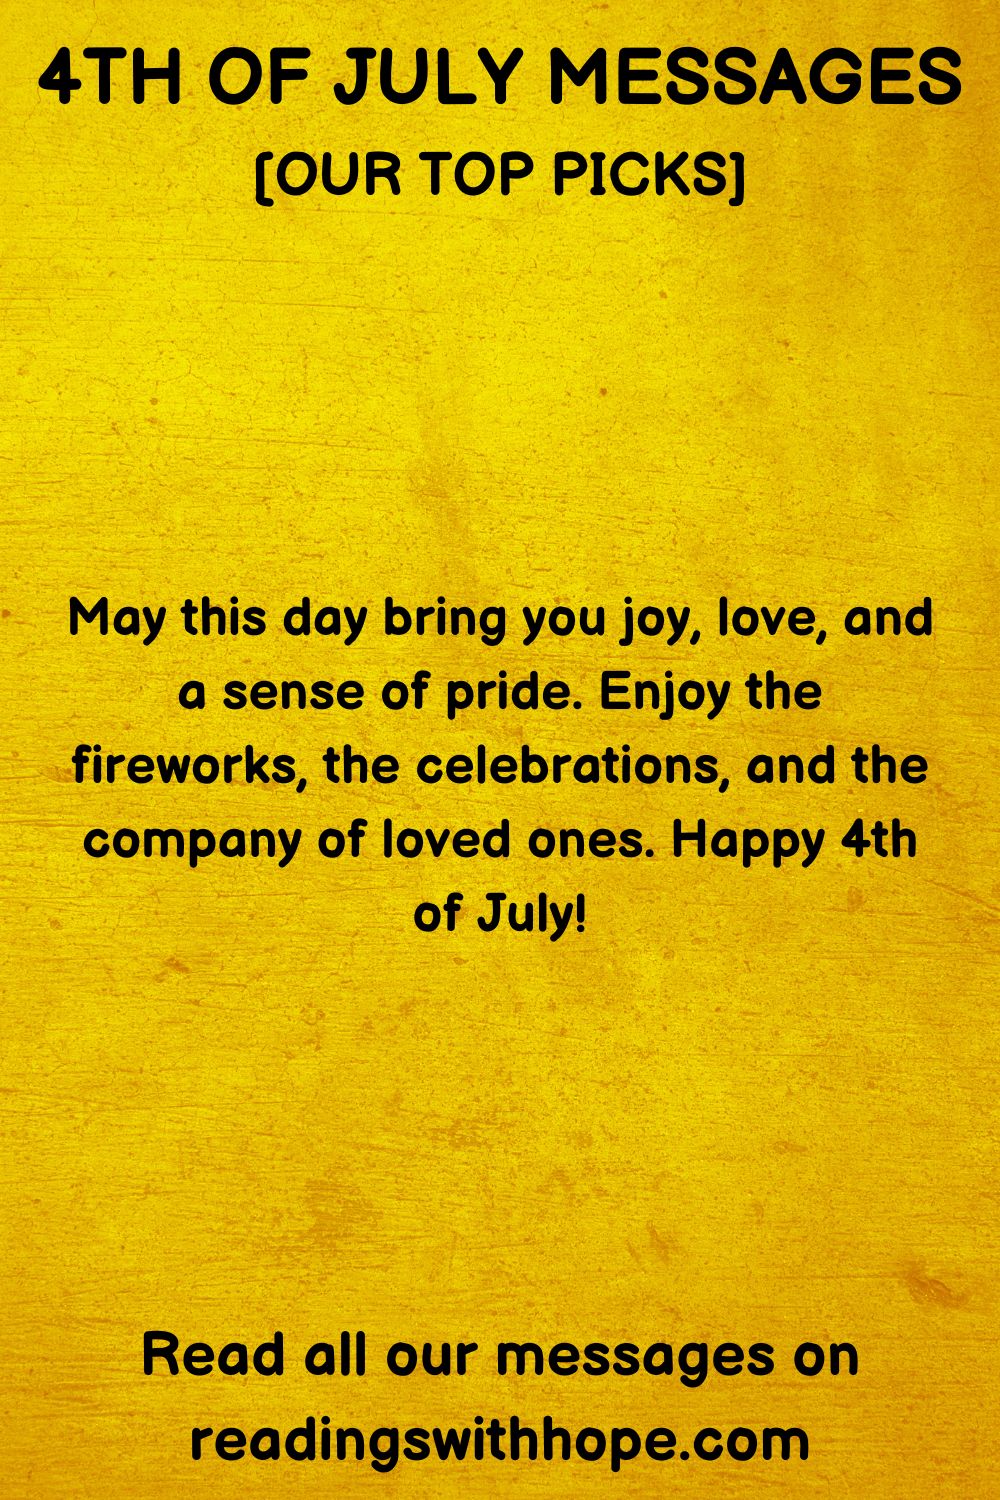 4th of July Message